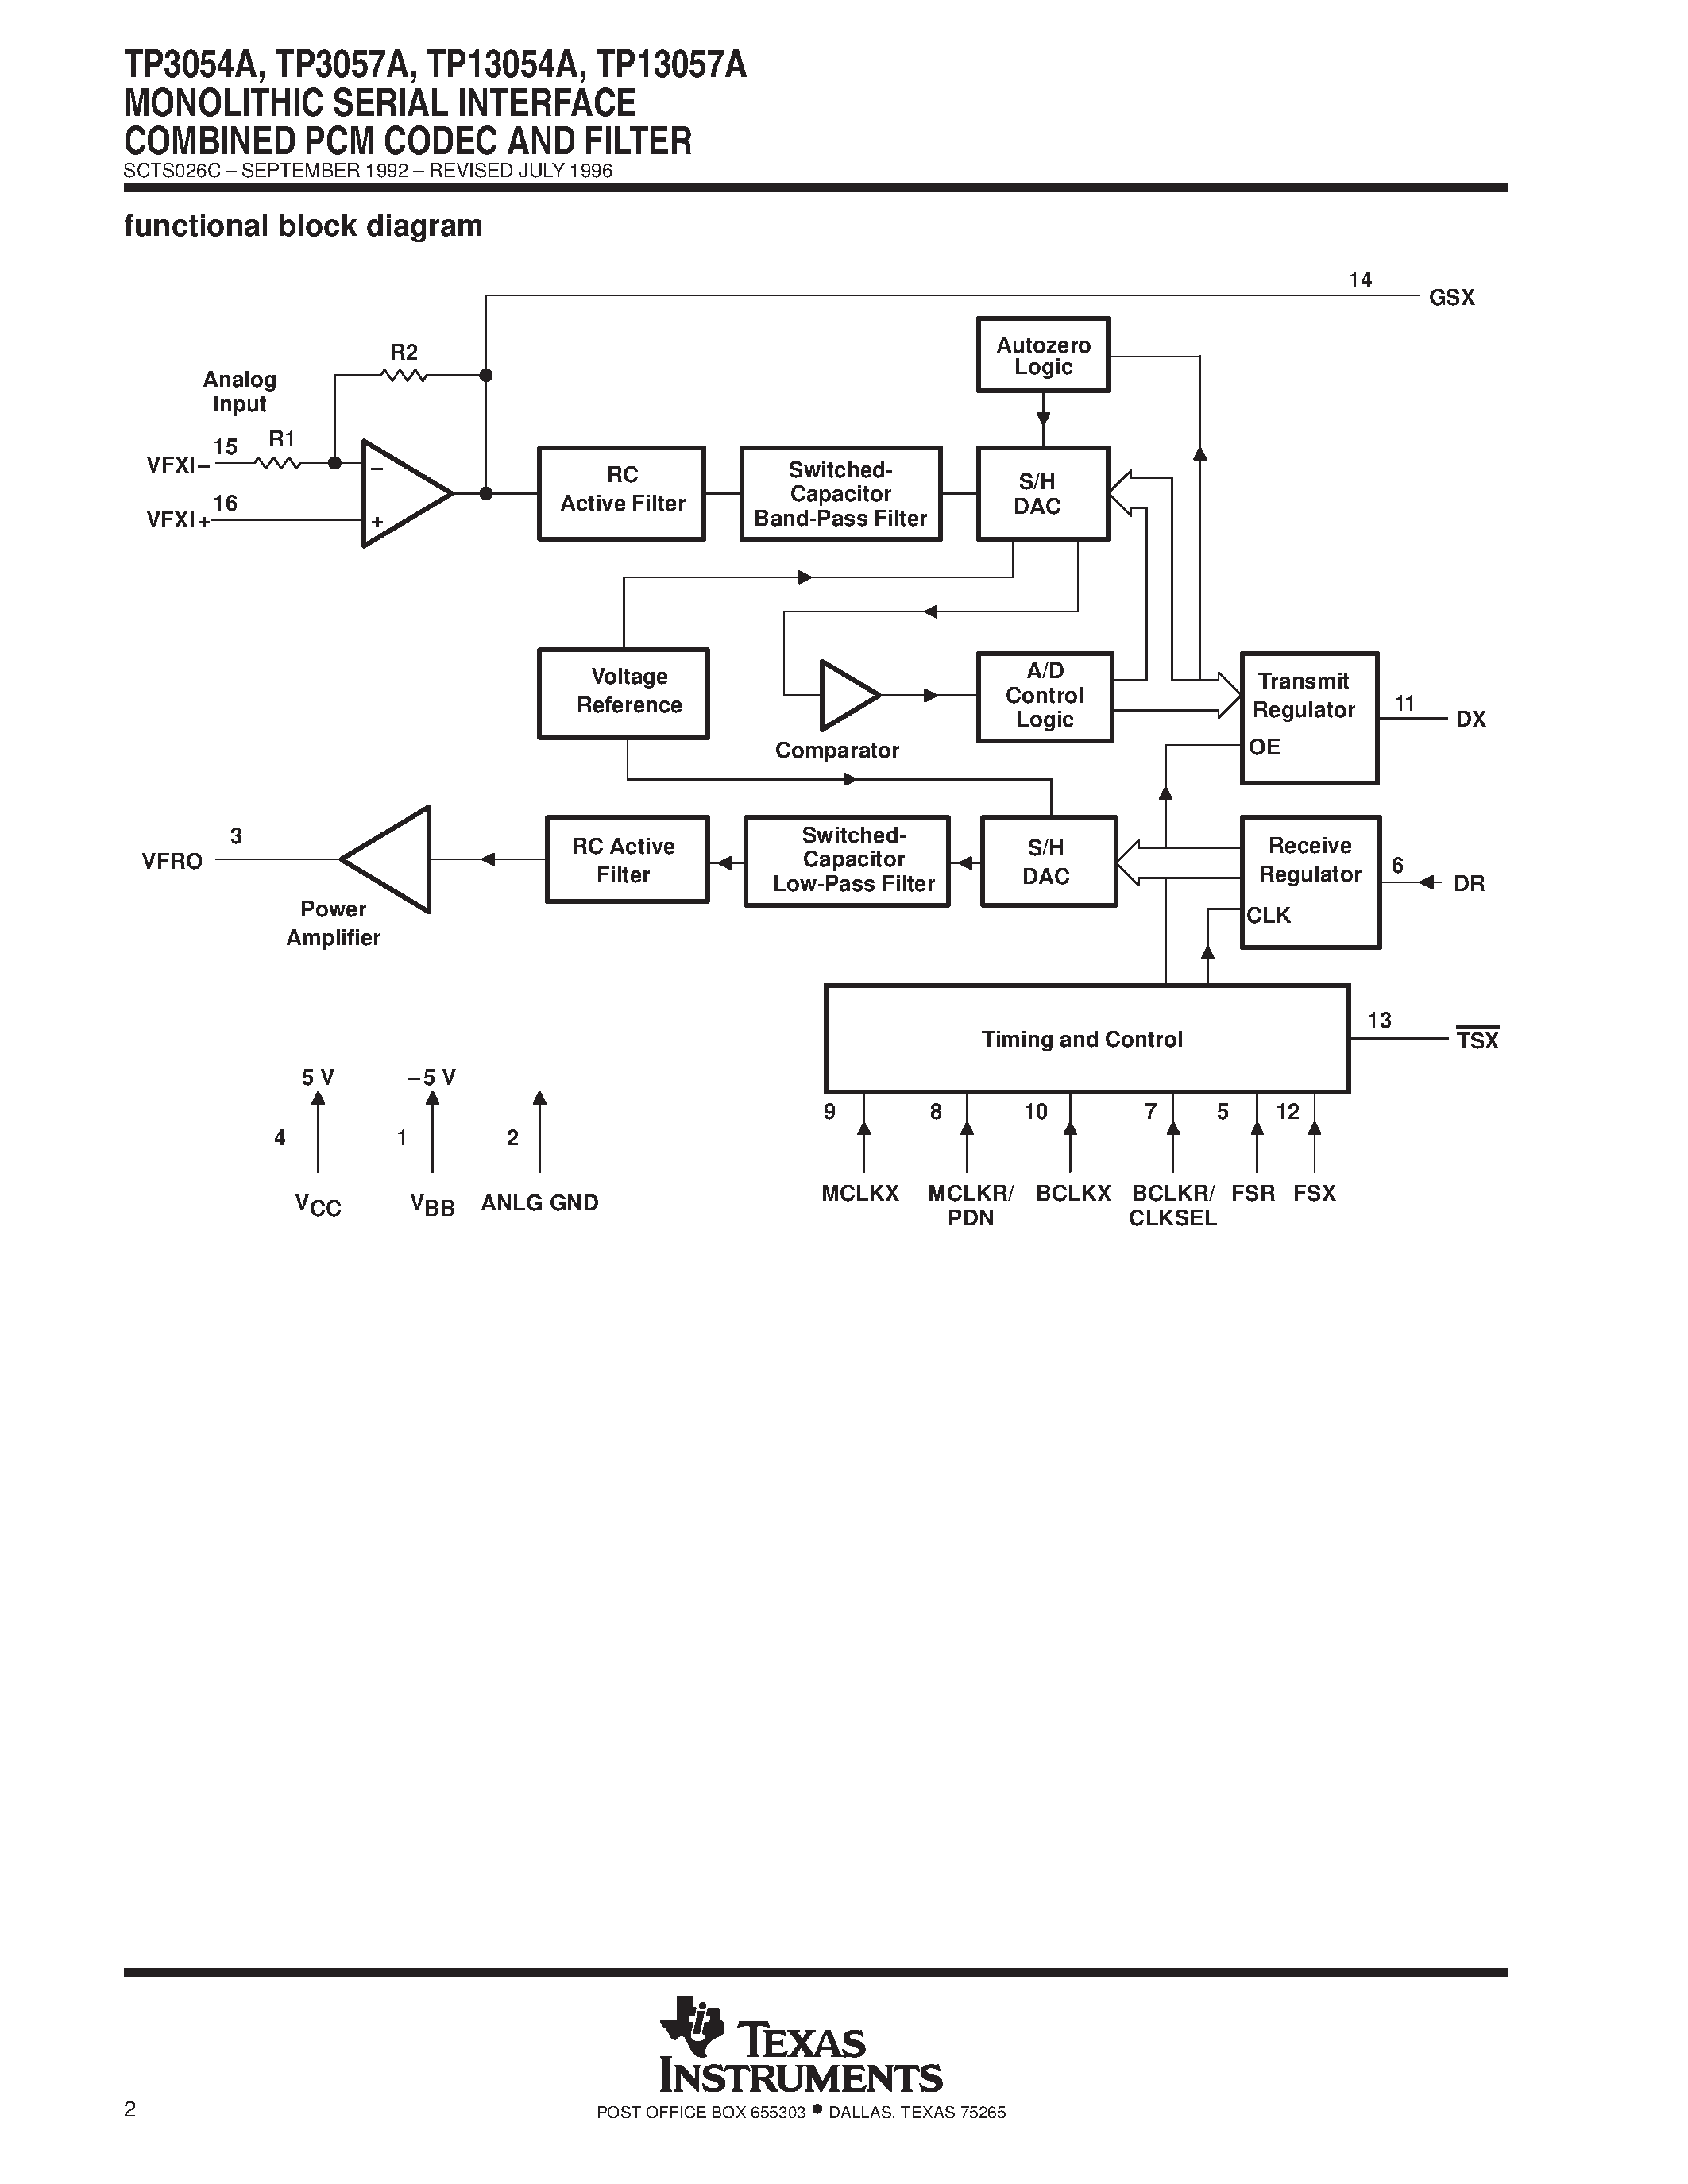 Datasheet TP13054A - MONOLITHIC SERIAL INTERFACE COMBINED PCM CODEC AND FILTER page 2